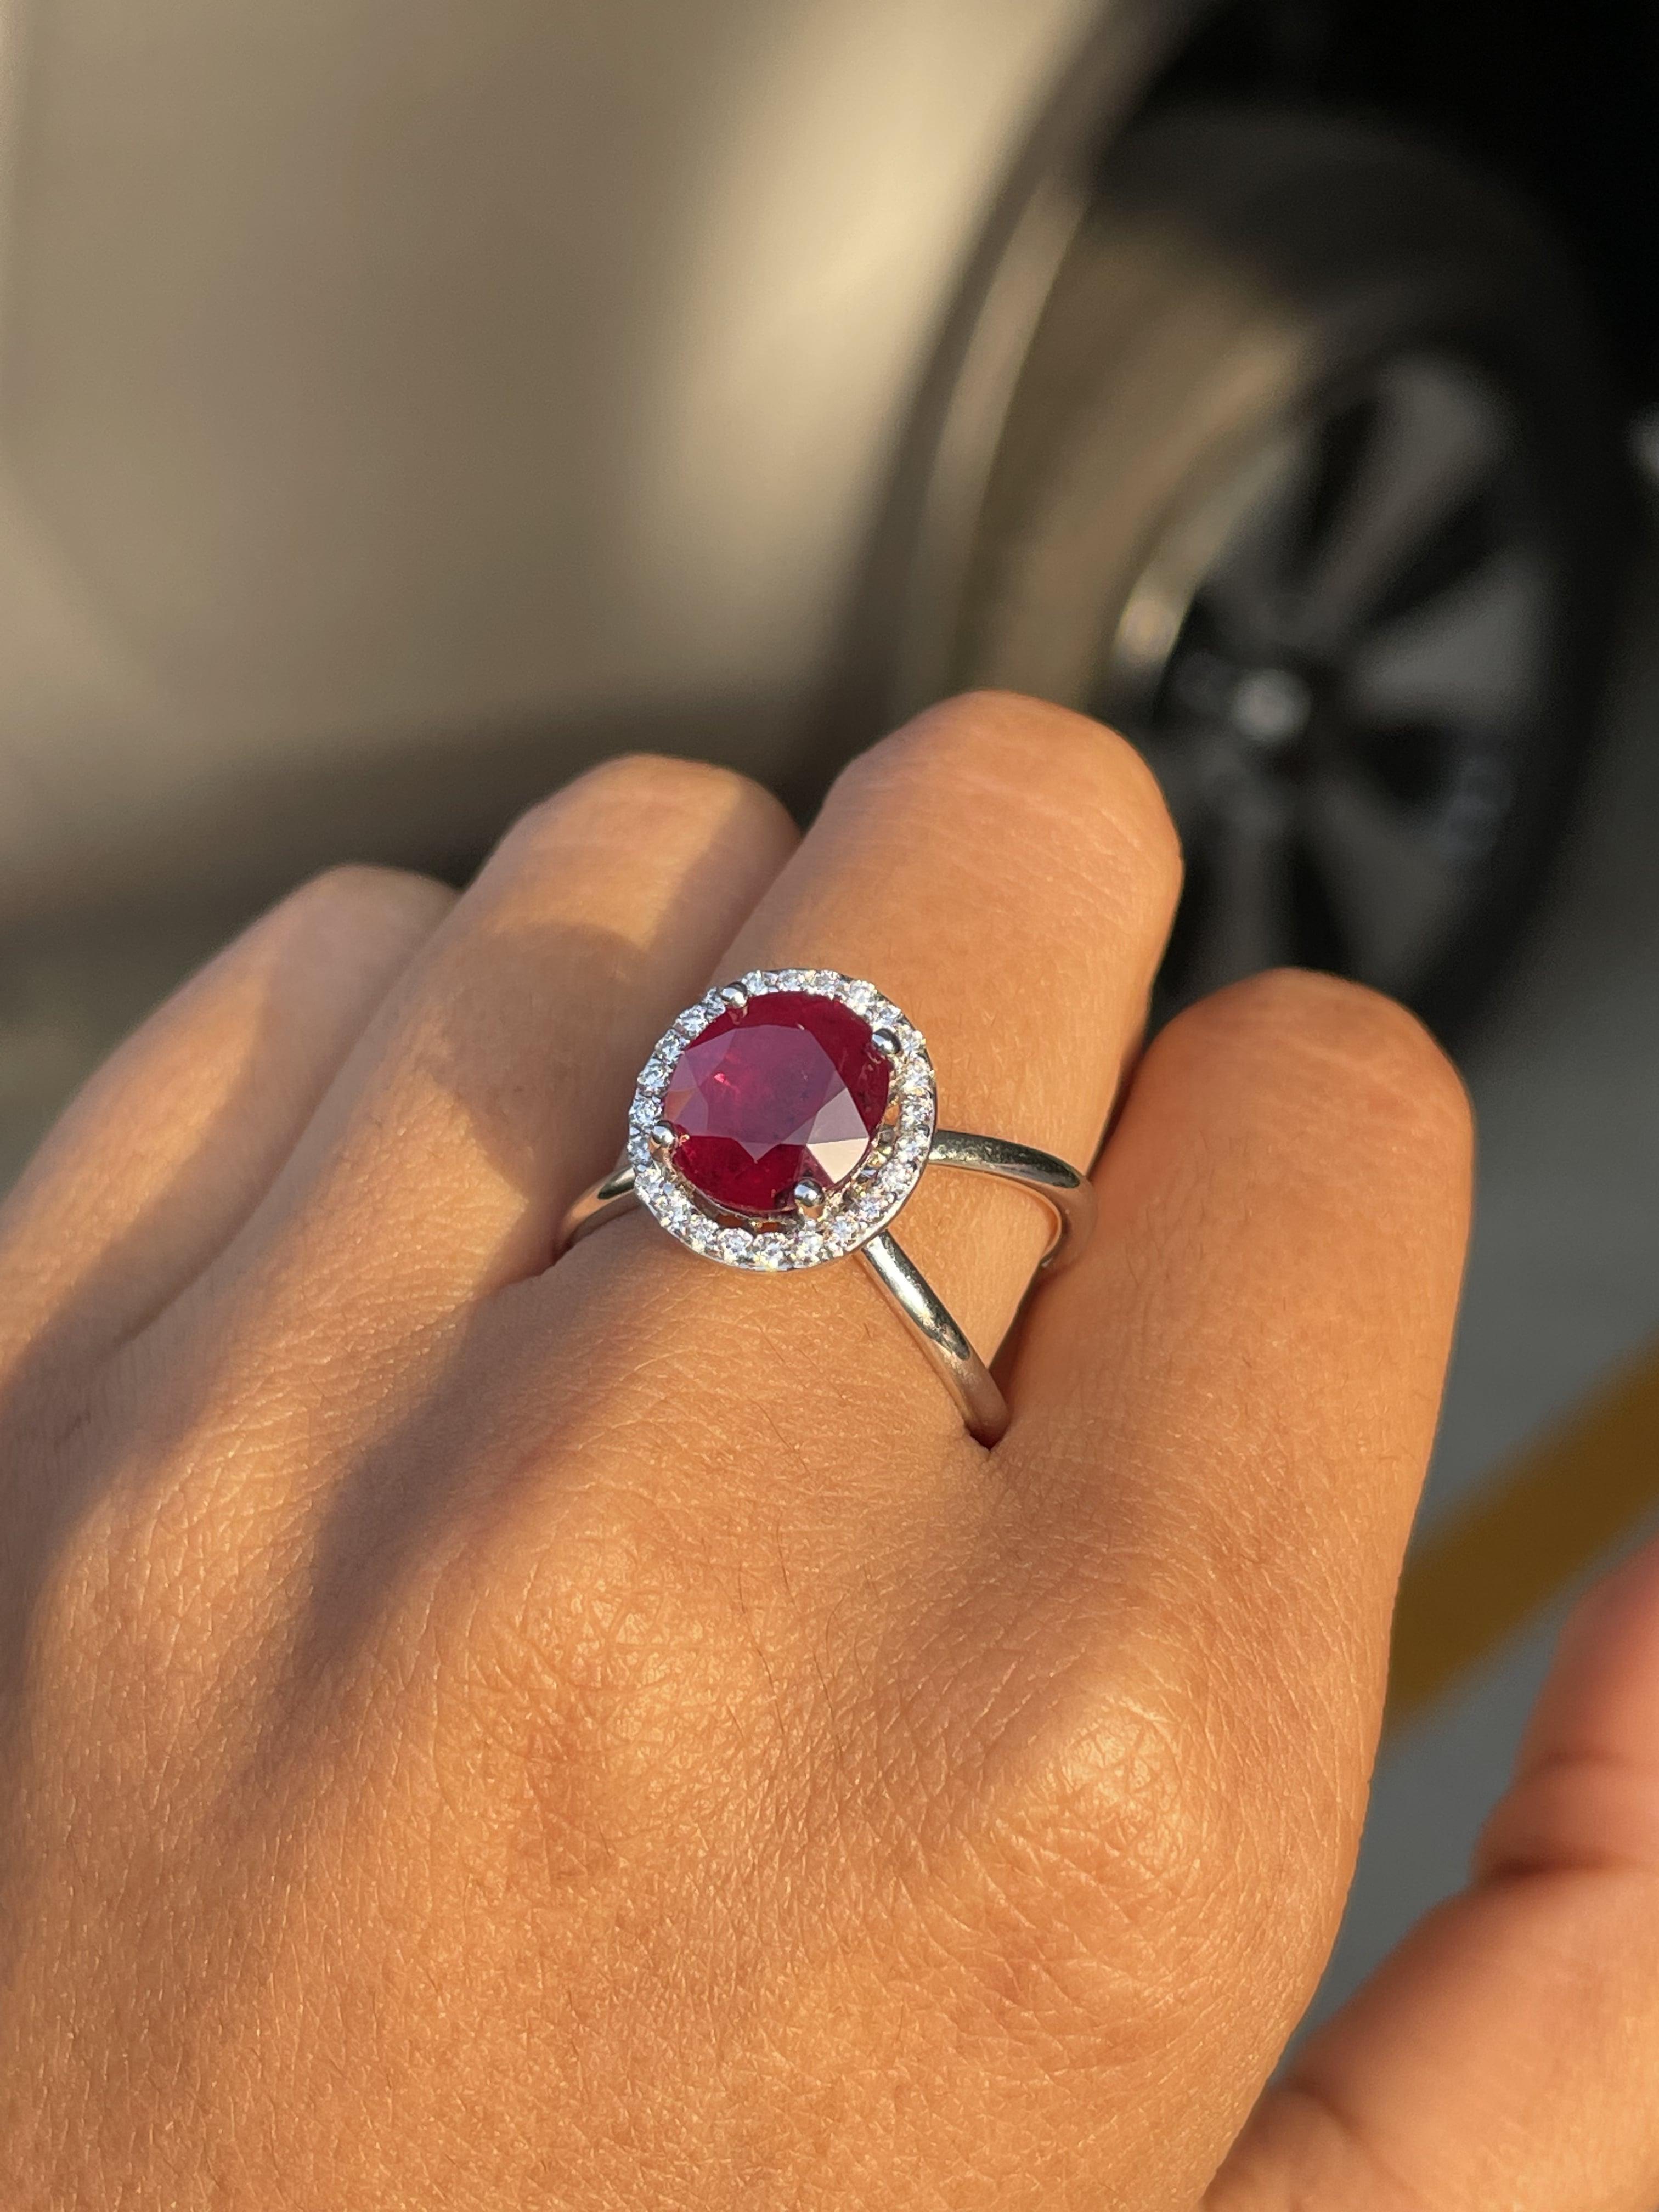 18K White Gold Fancy Cross Band 3.23 Ct Round Mozambique Ruby Ring For Sale 3